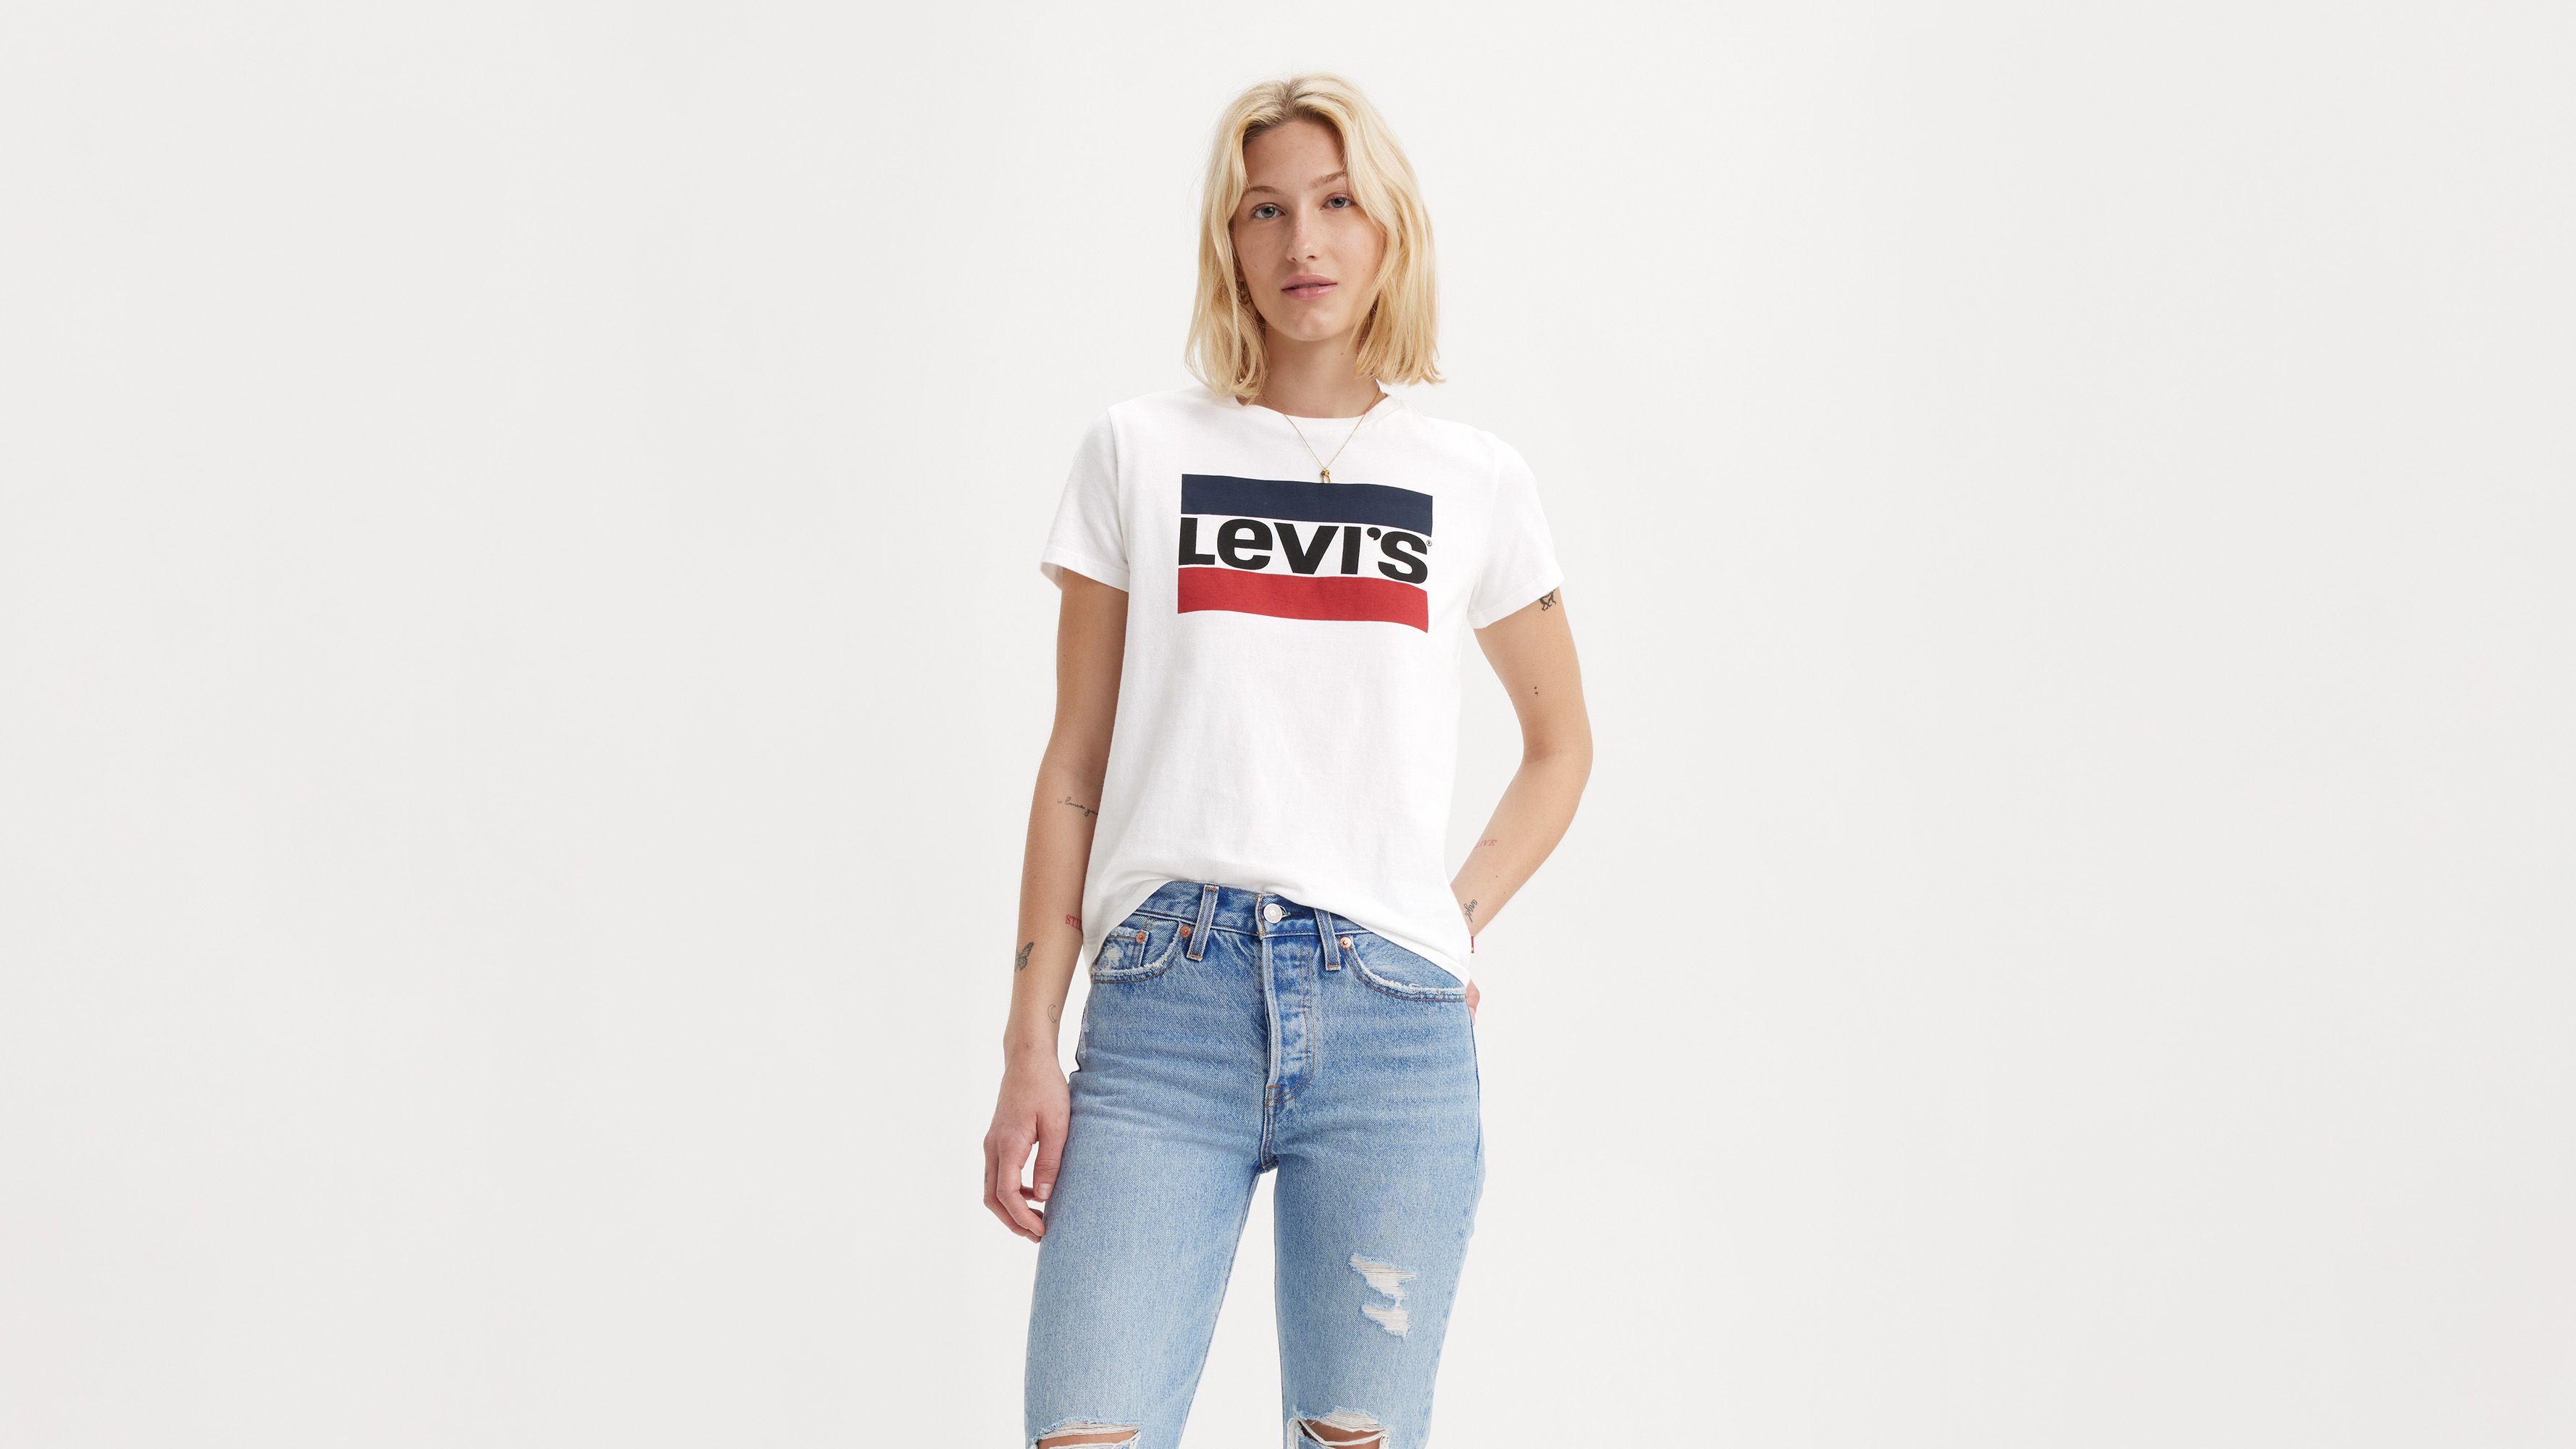 perfect graphic tee levis